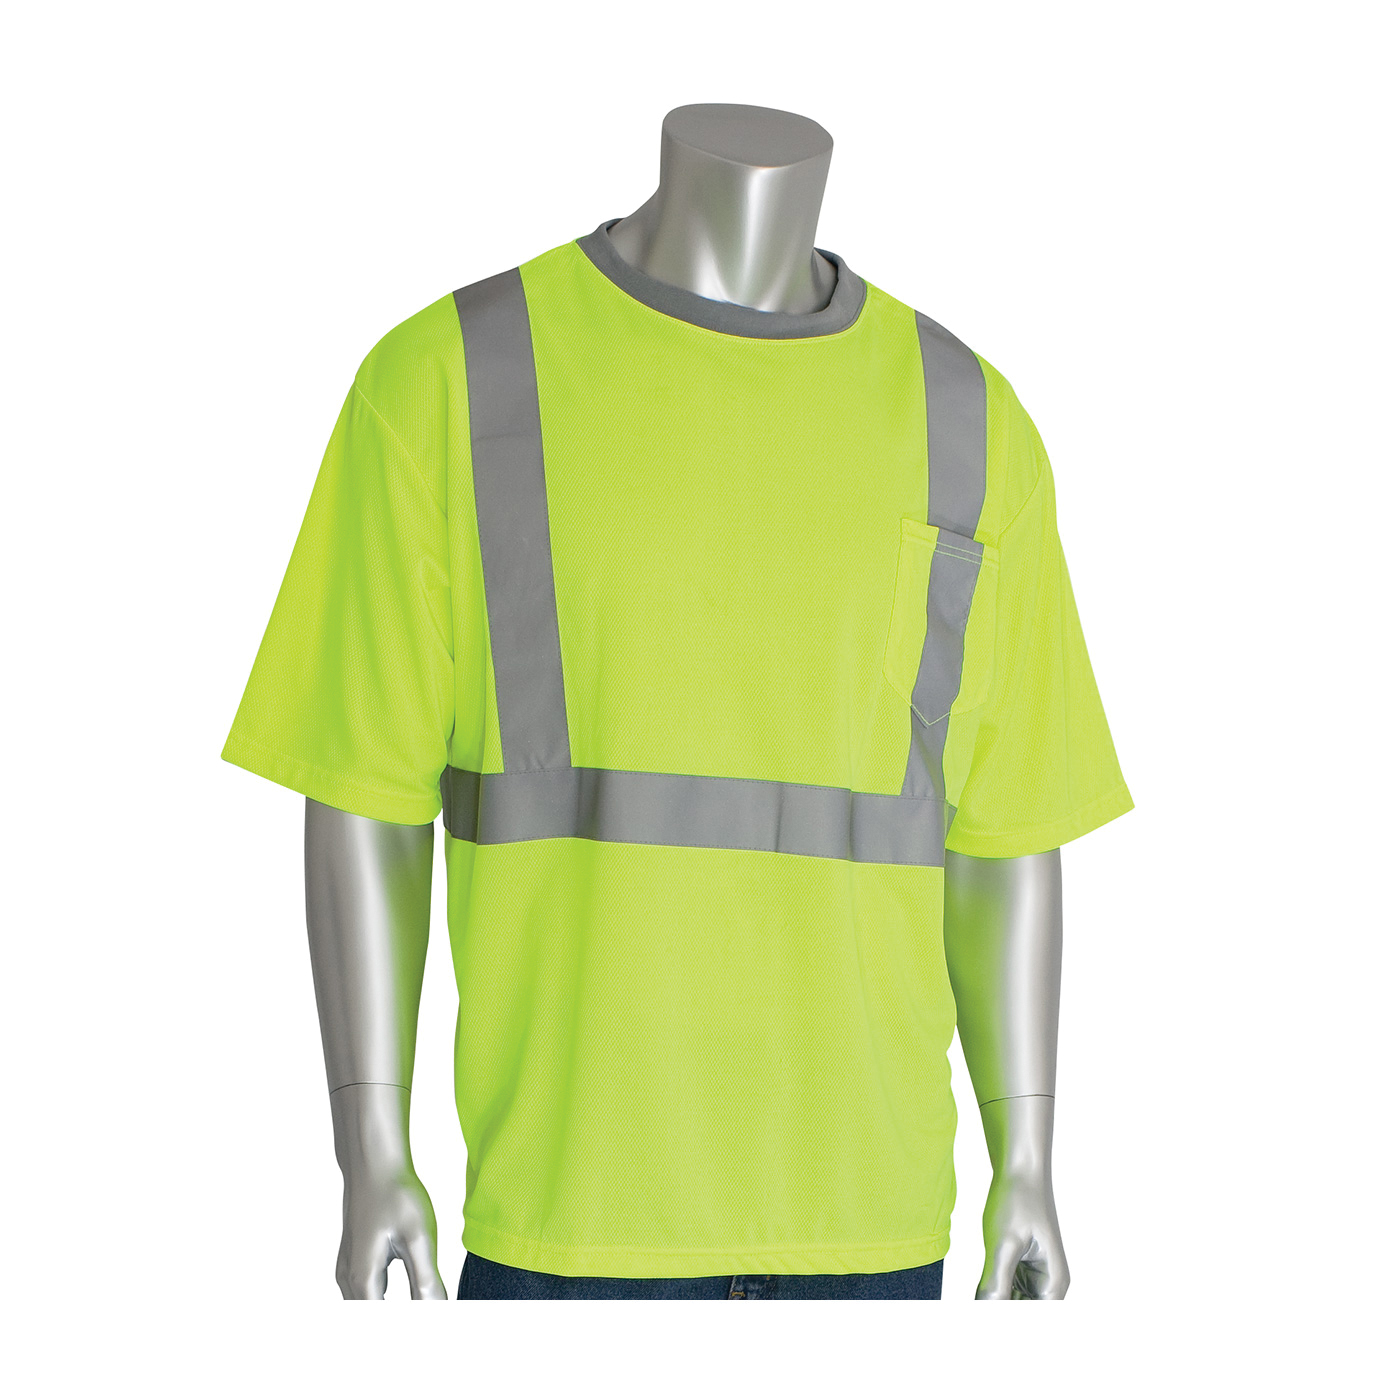 PIP® 312-1200-LY Short Sleeve Crew Neck T-Shirt With Reflective, Hi-Viz Lime Yellow, Bird's Eye Polyester, 27-1/2 in L